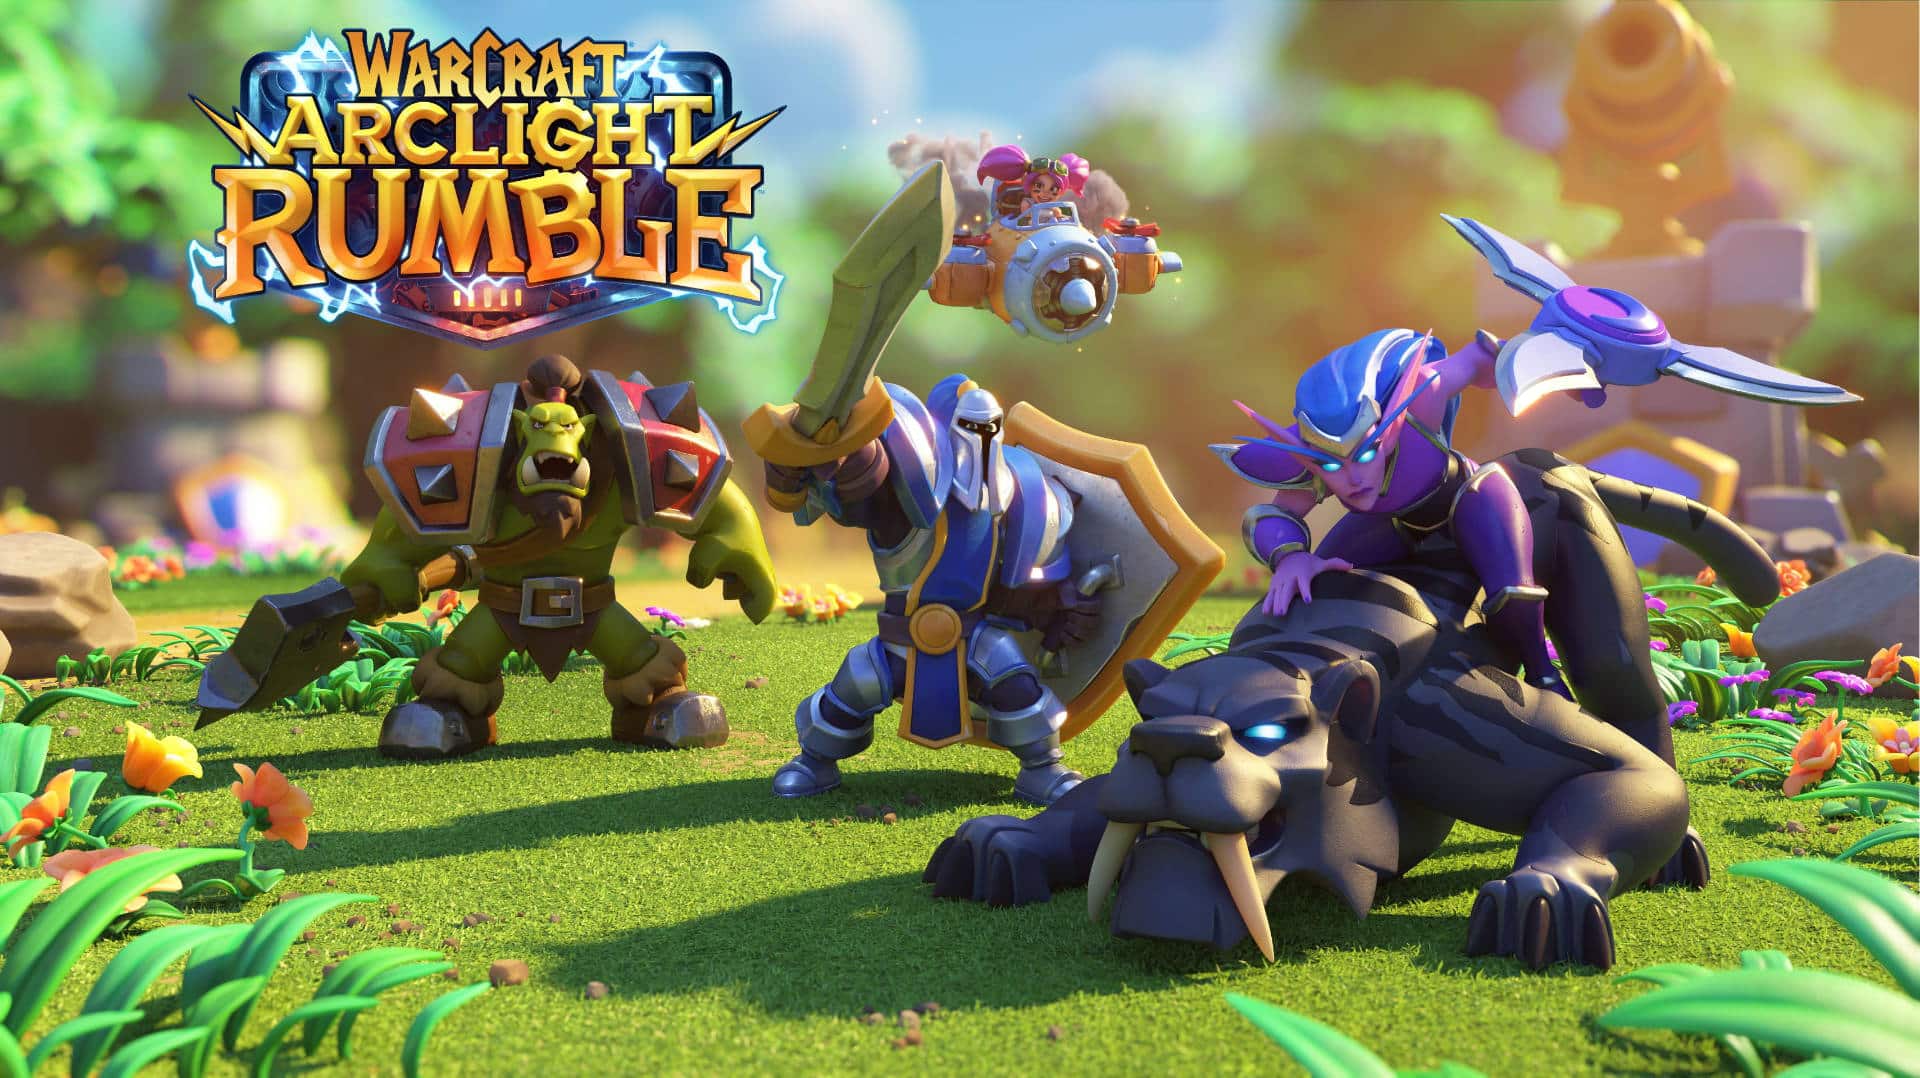 Warcraft Arclight Rumble for iOS and Android Announced